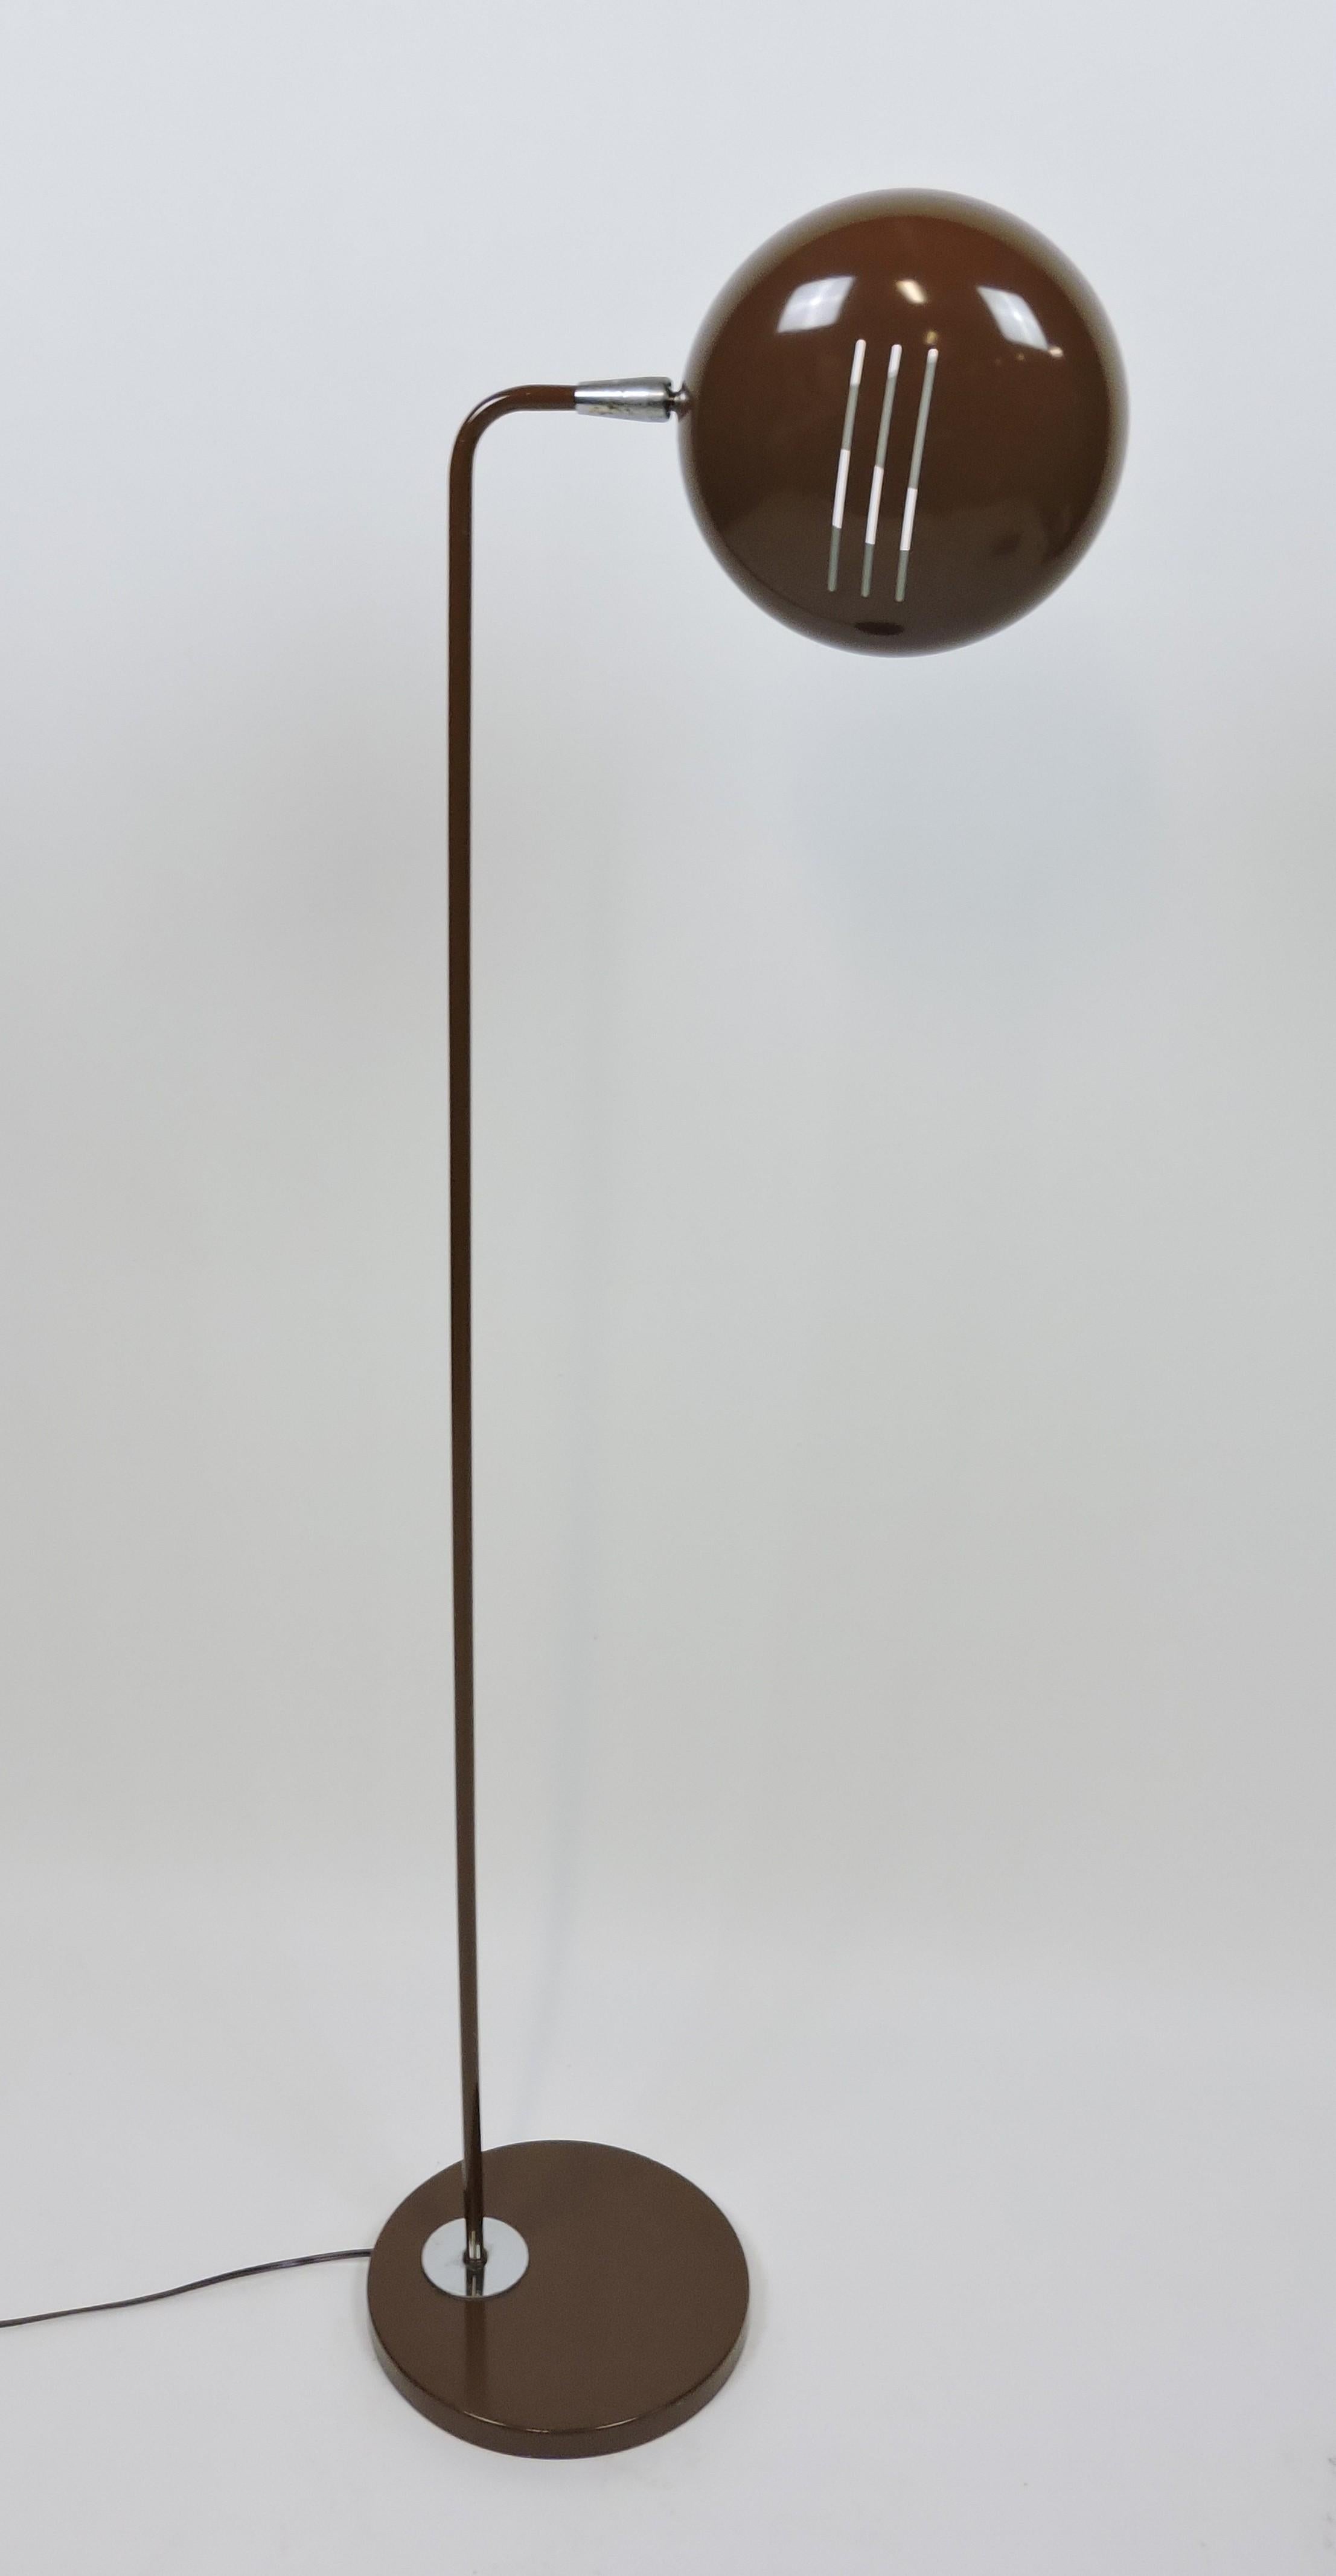 Very cool mid century floor lamp with a brown enamel finish and an articulated shade. This heavy and well-made lamp has a round shade that can be adjusted to any angle and takes a single standard base bulb. It has all new wiring.